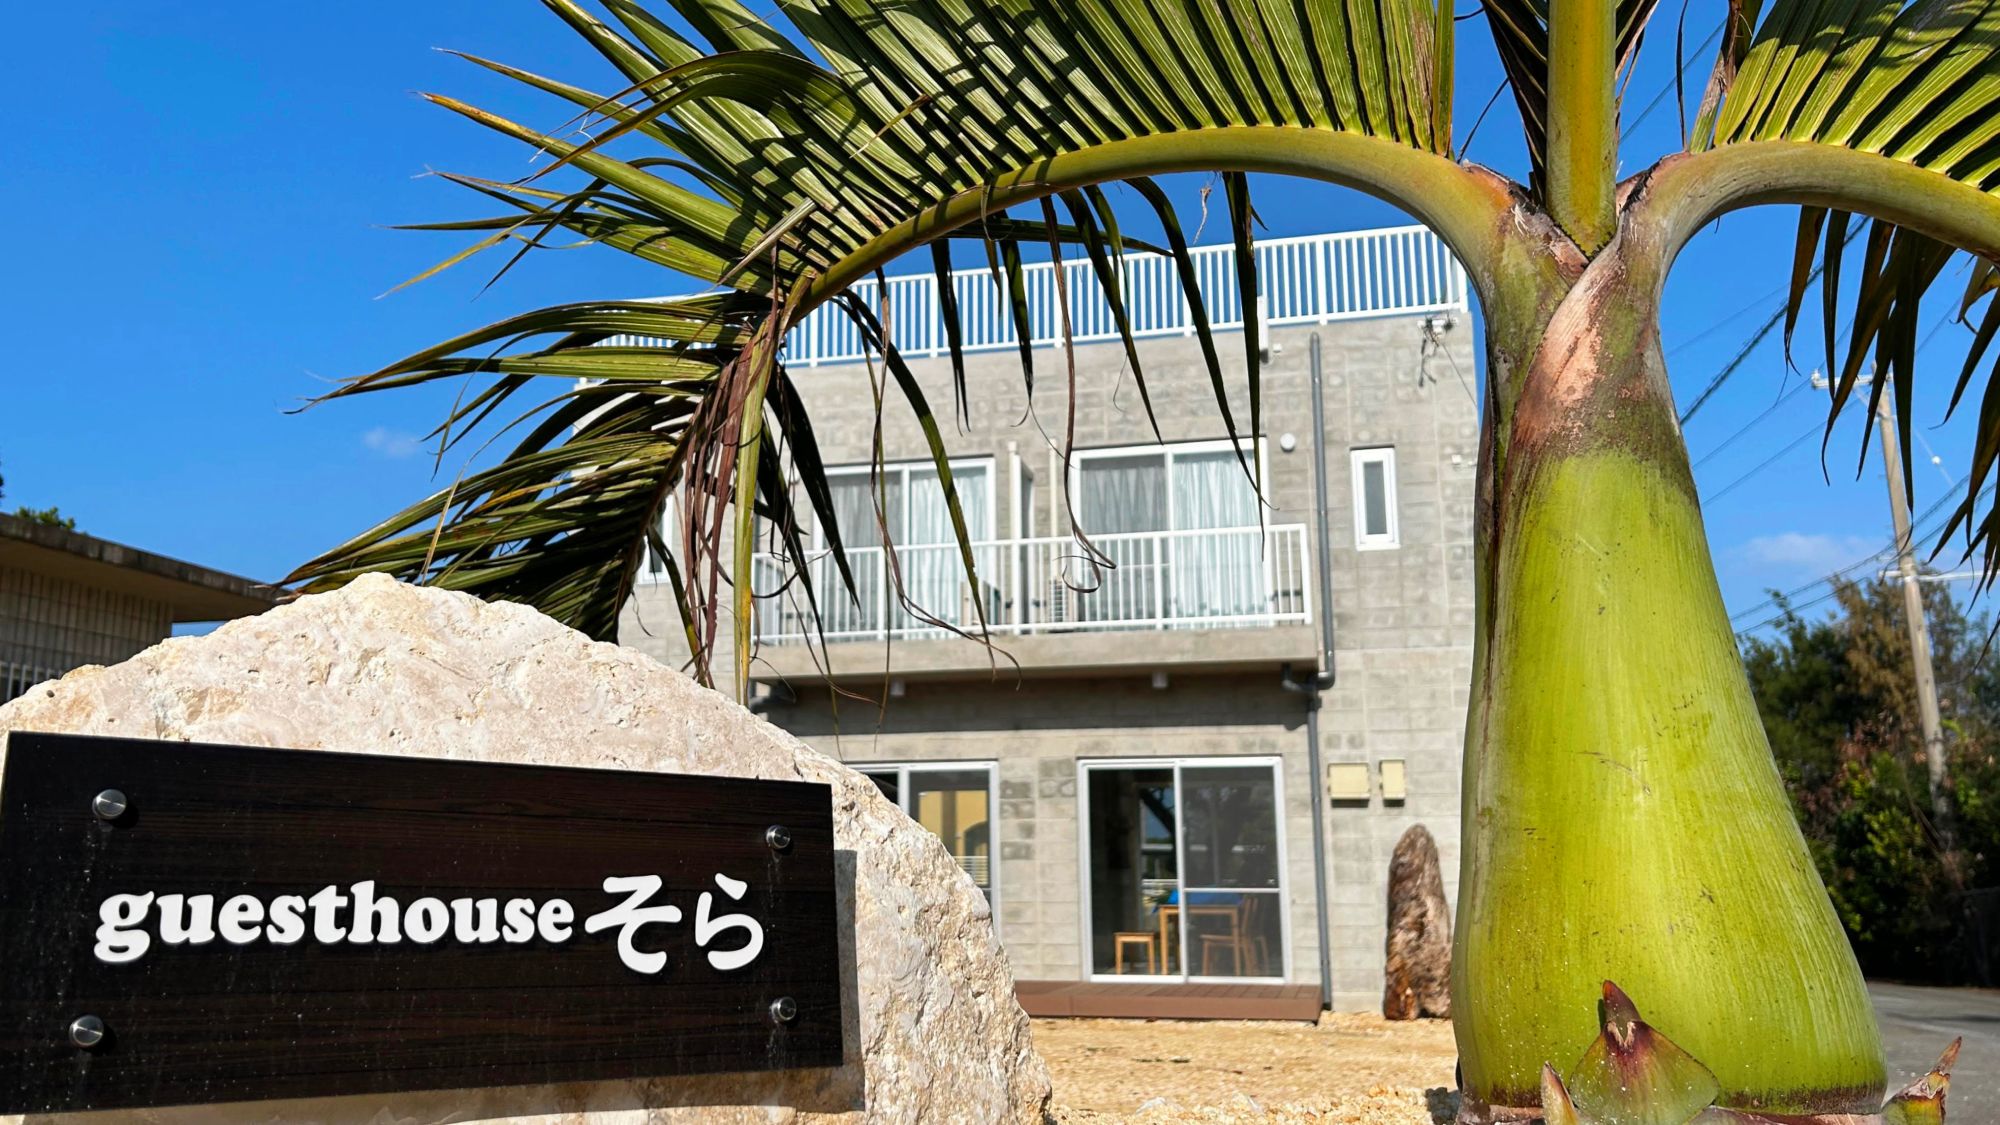 guesthouseそら<宮古島>